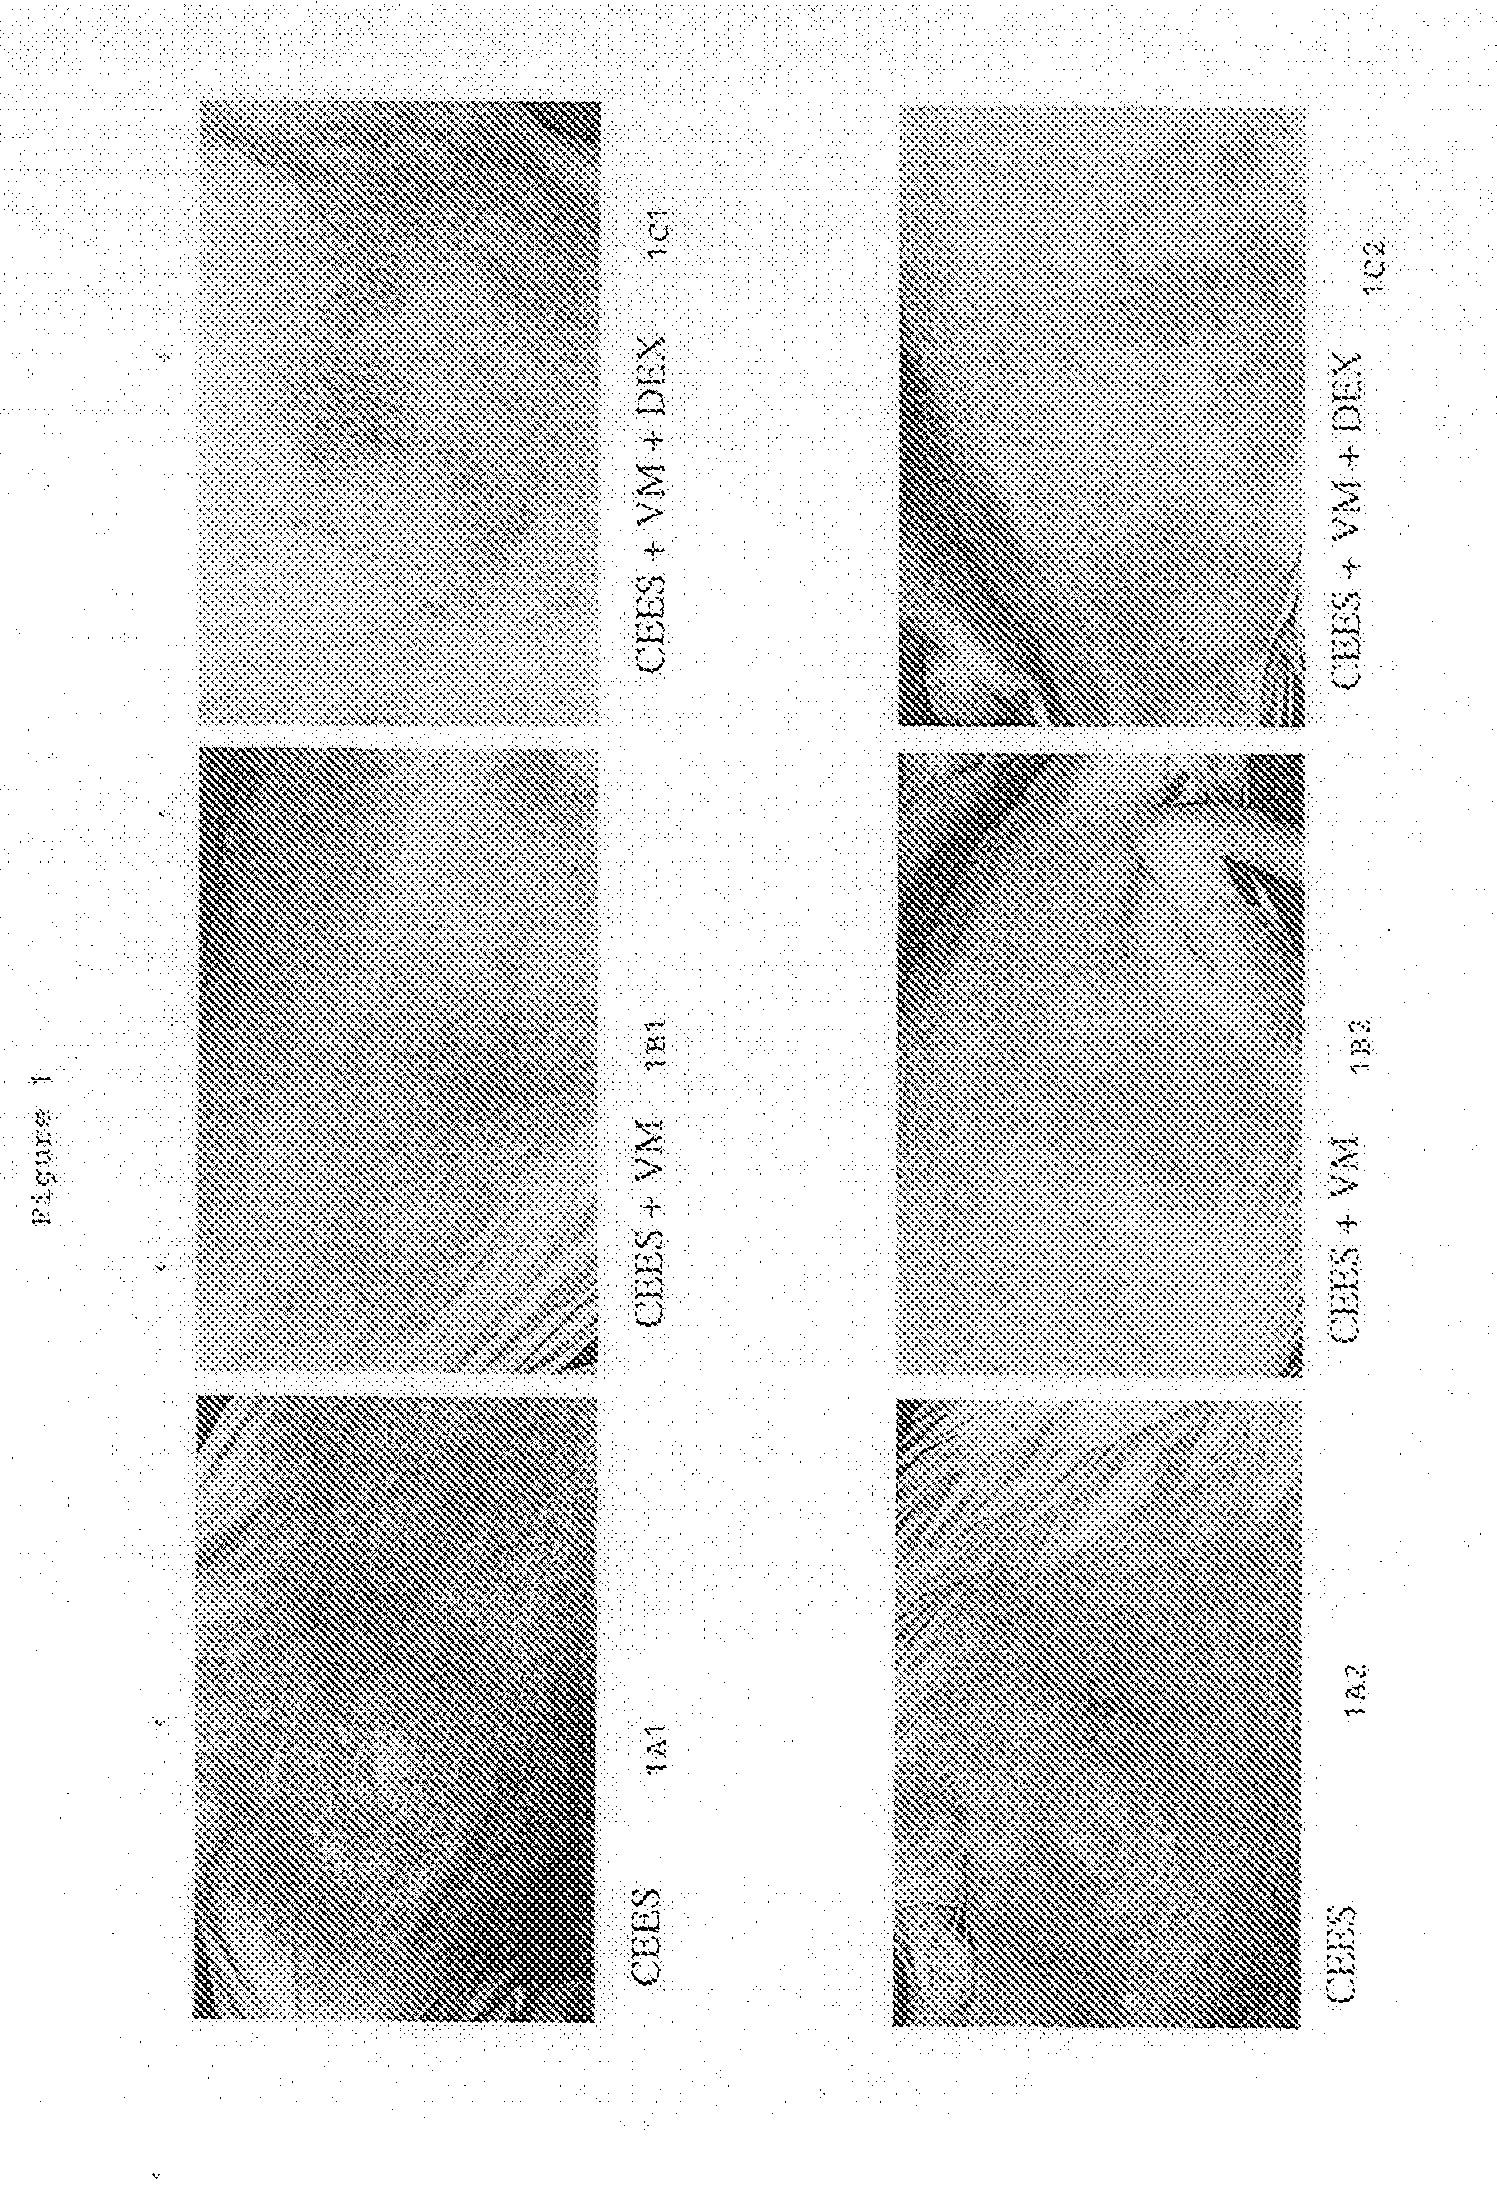 Composition for treating sulfur mustard toxicity and methods of using same